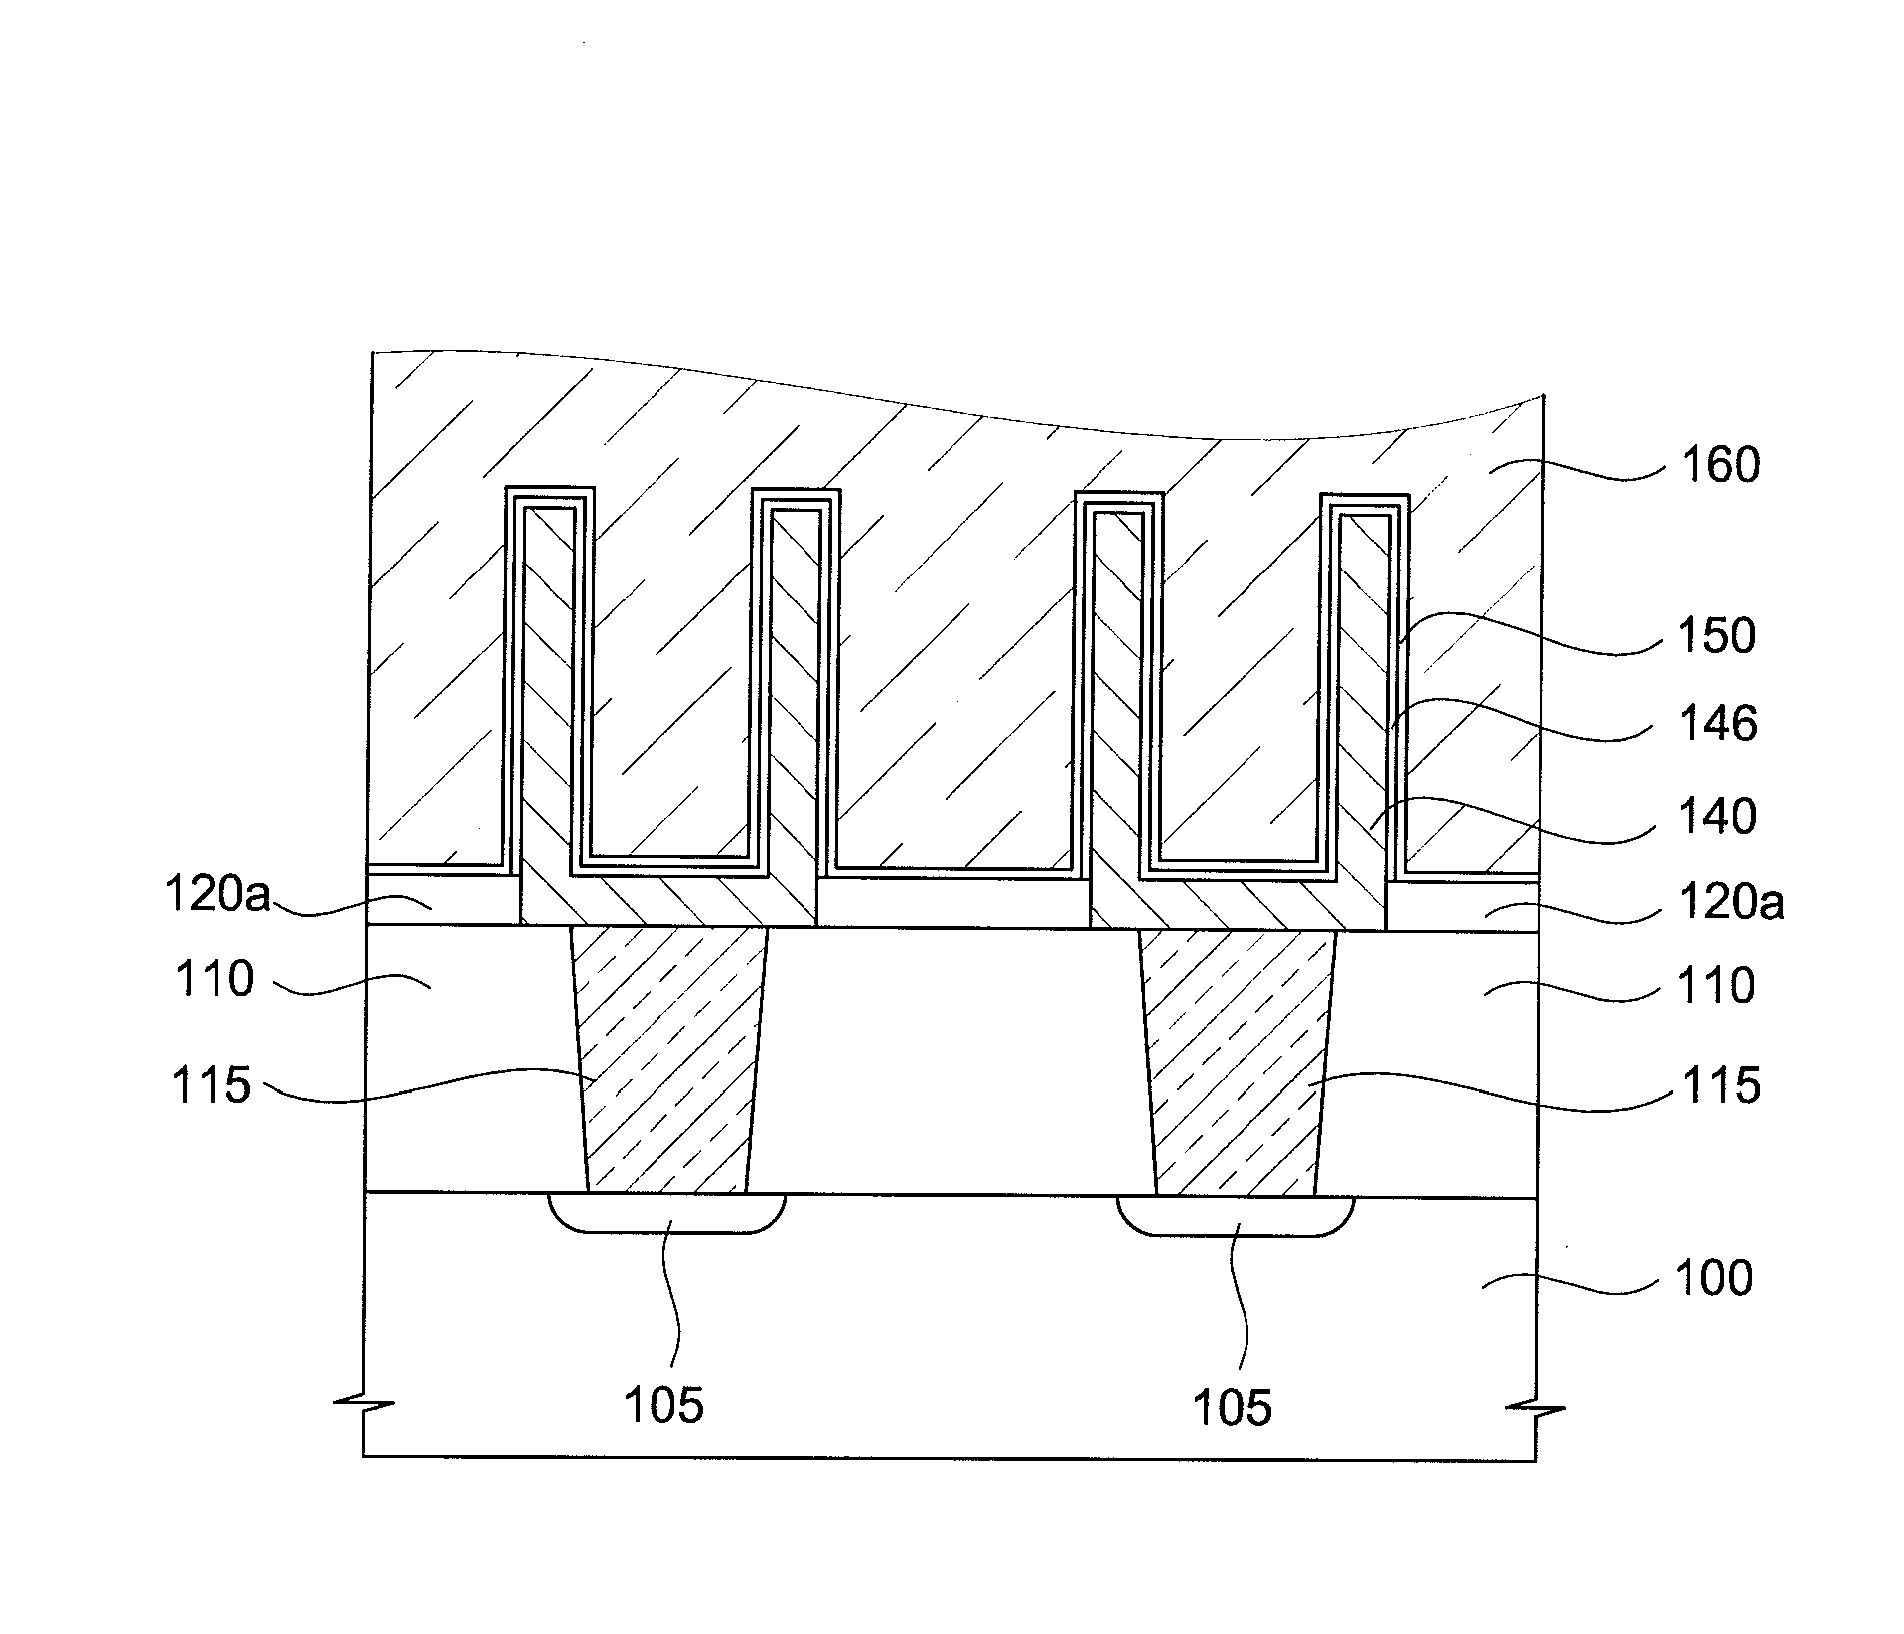 CAPACITOR HAVING Ru ELECTRODE AND TiO2 DIELECTRIC LAYER FOR SEMICONDUCTOR DEVICE AND METHOD OF FABRICATING THE SAME